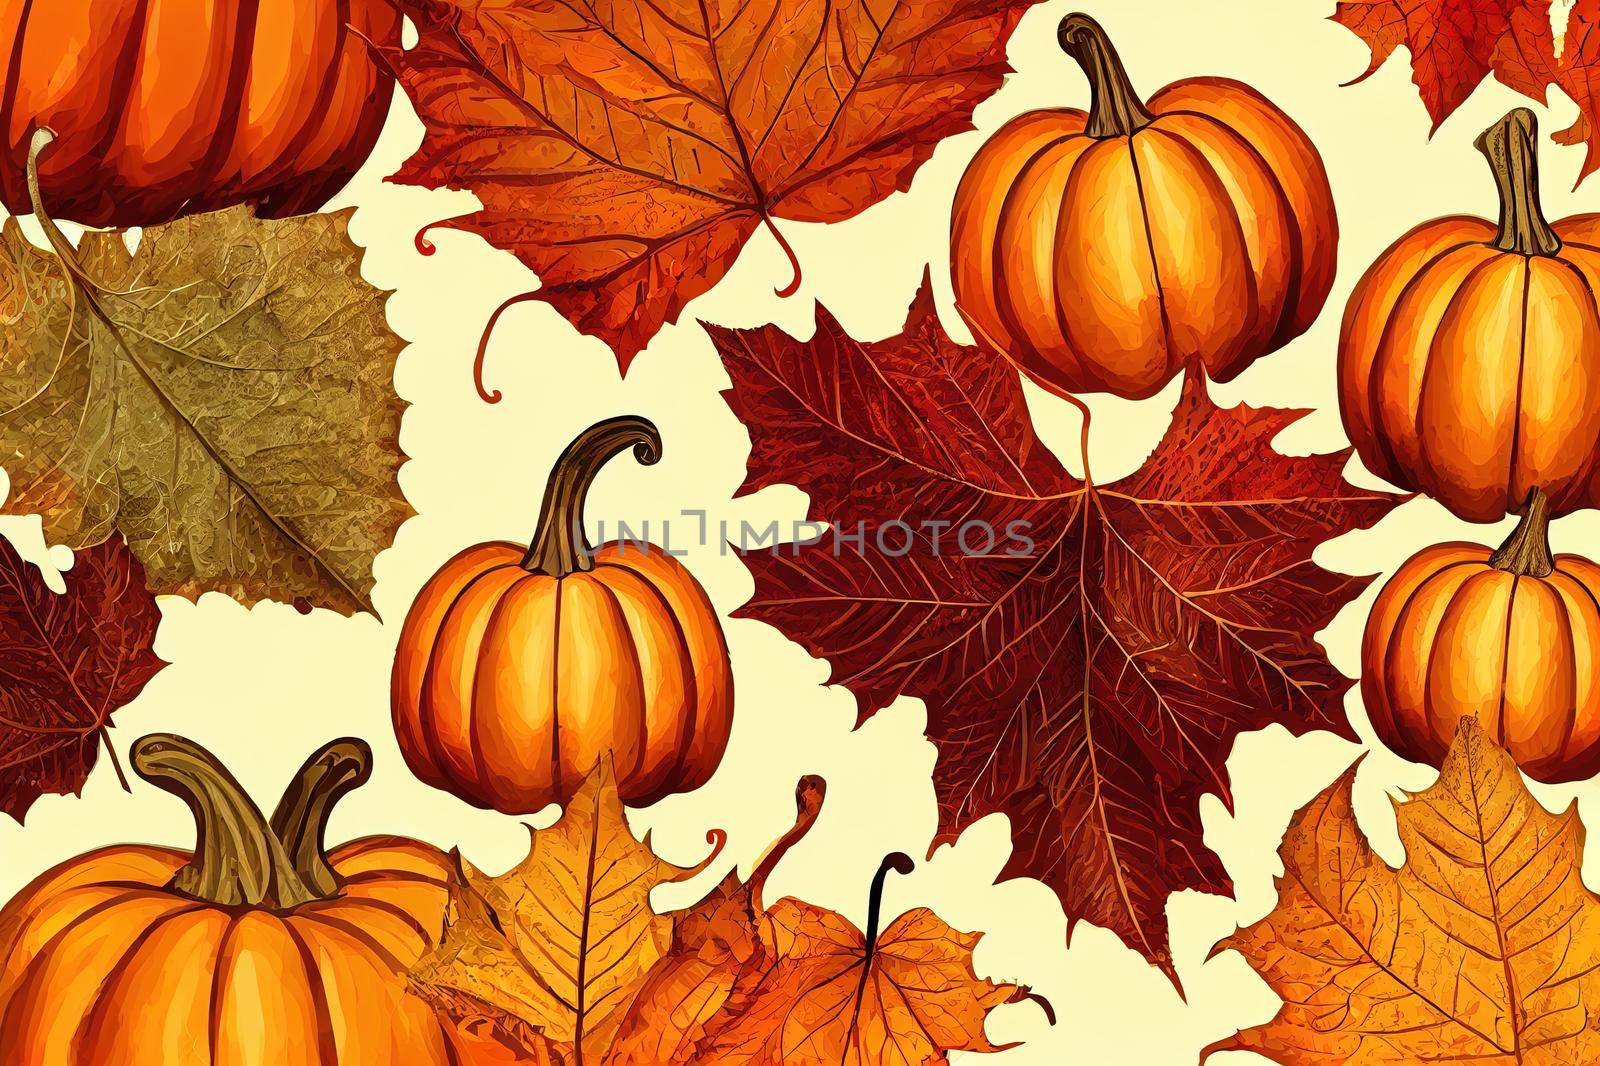 autumn illustration. several cute autumn pumpkins with curly roots on a brown background. leaves are flying around, in the middle is the inscription autumn. High quality illustration